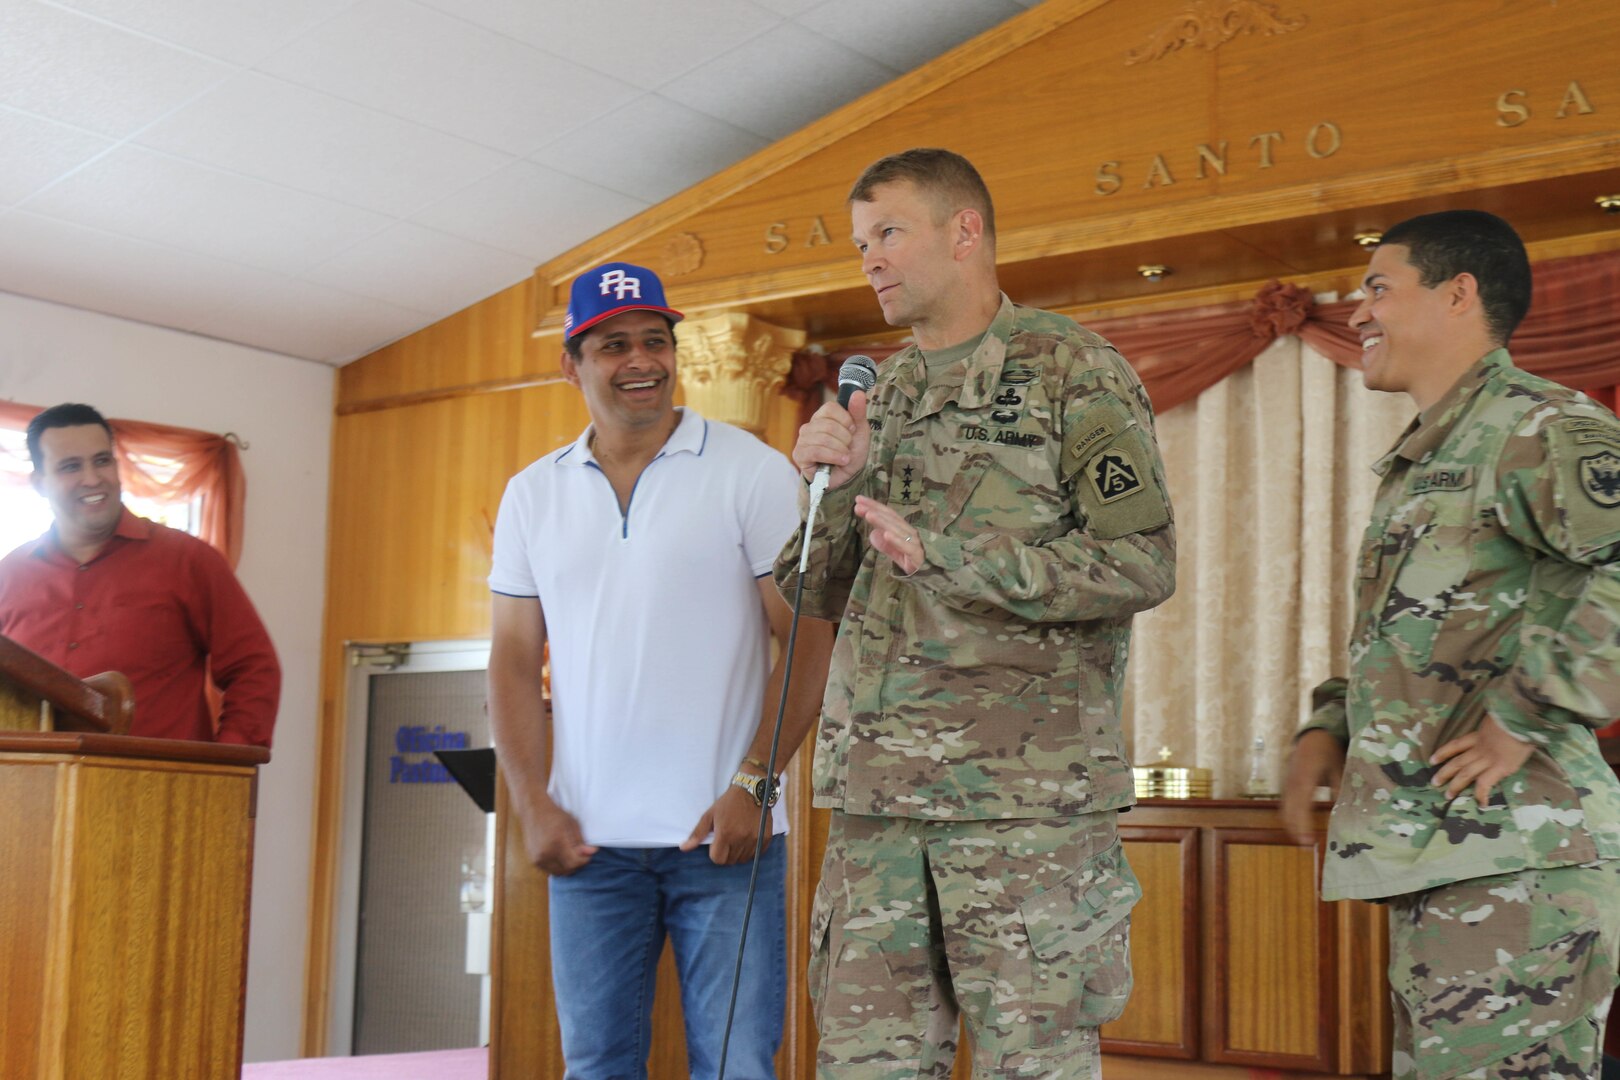 Lt. Gen. Jeffrey Buchanan breaks the ice as he introduces himself to members of a local church with Carlos Molina, mayor of Arecibo Oct. 29. Buchanan, appointed by the Pentagon to lead recovery efforts in Puerto Rico and the U.S. Virgin Islands, met with the mayor to discuss the condition of the municipality's bridges and water supply as well as ways to support residents displaced from their homes by Hurricane Maria.